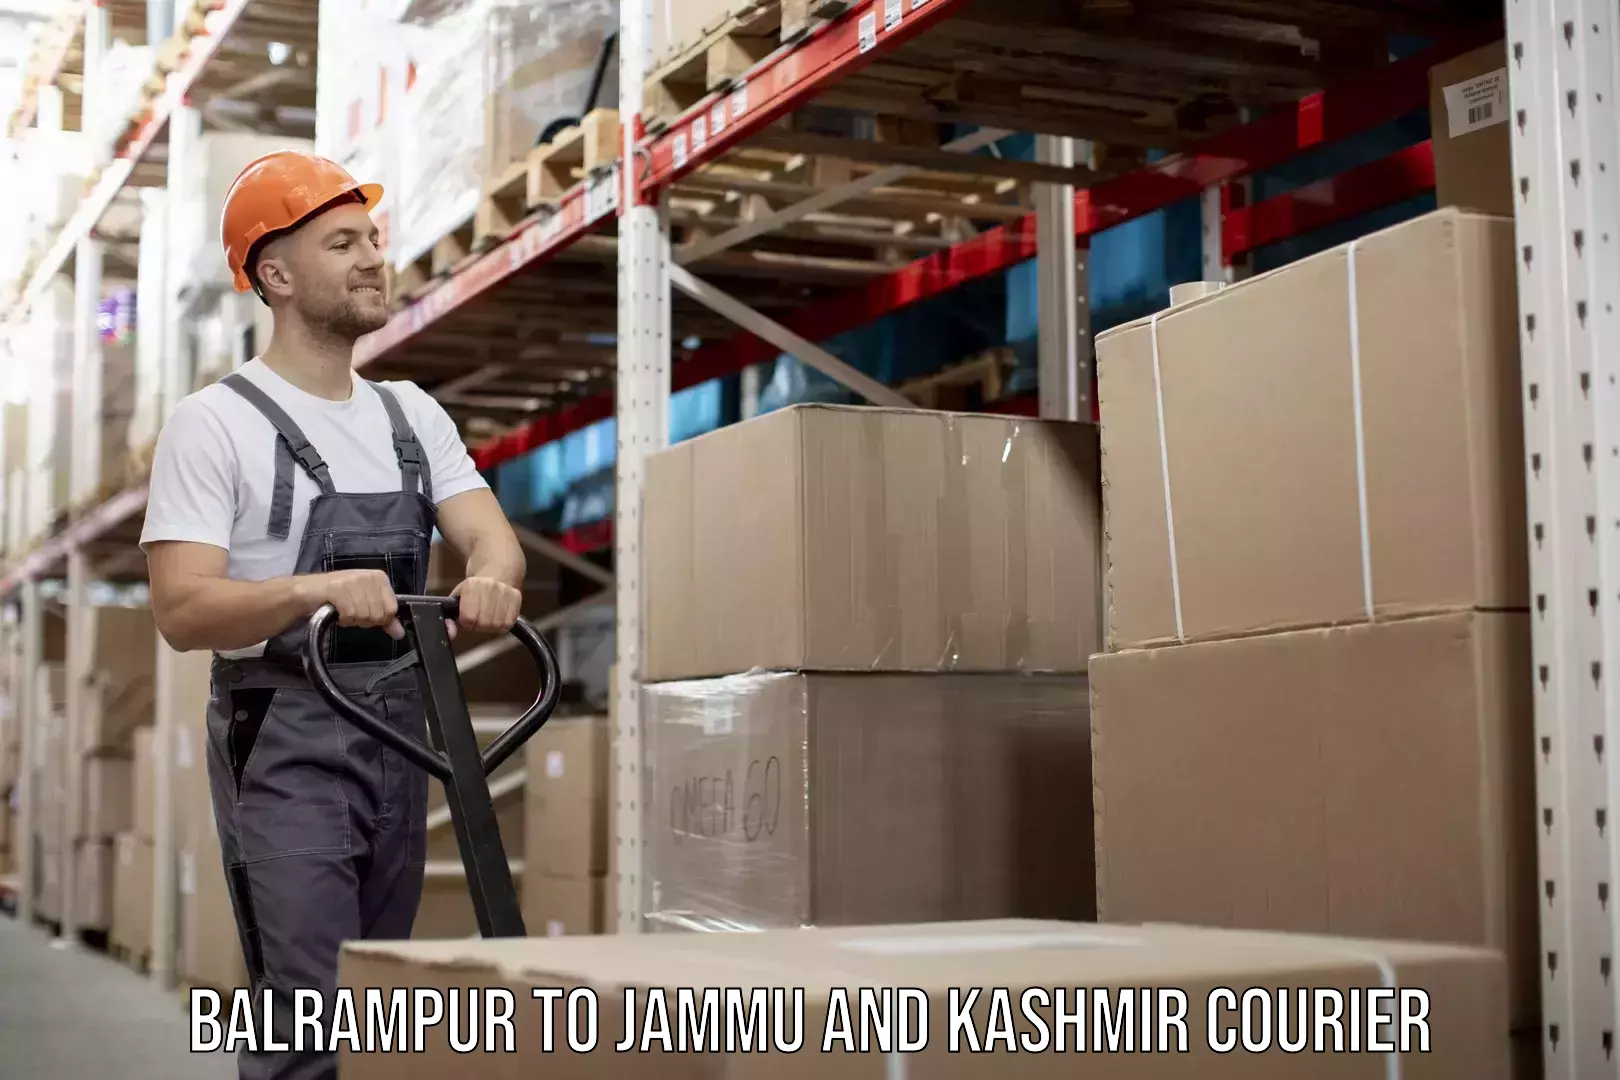 User-friendly delivery service Balrampur to Jammu and Kashmir